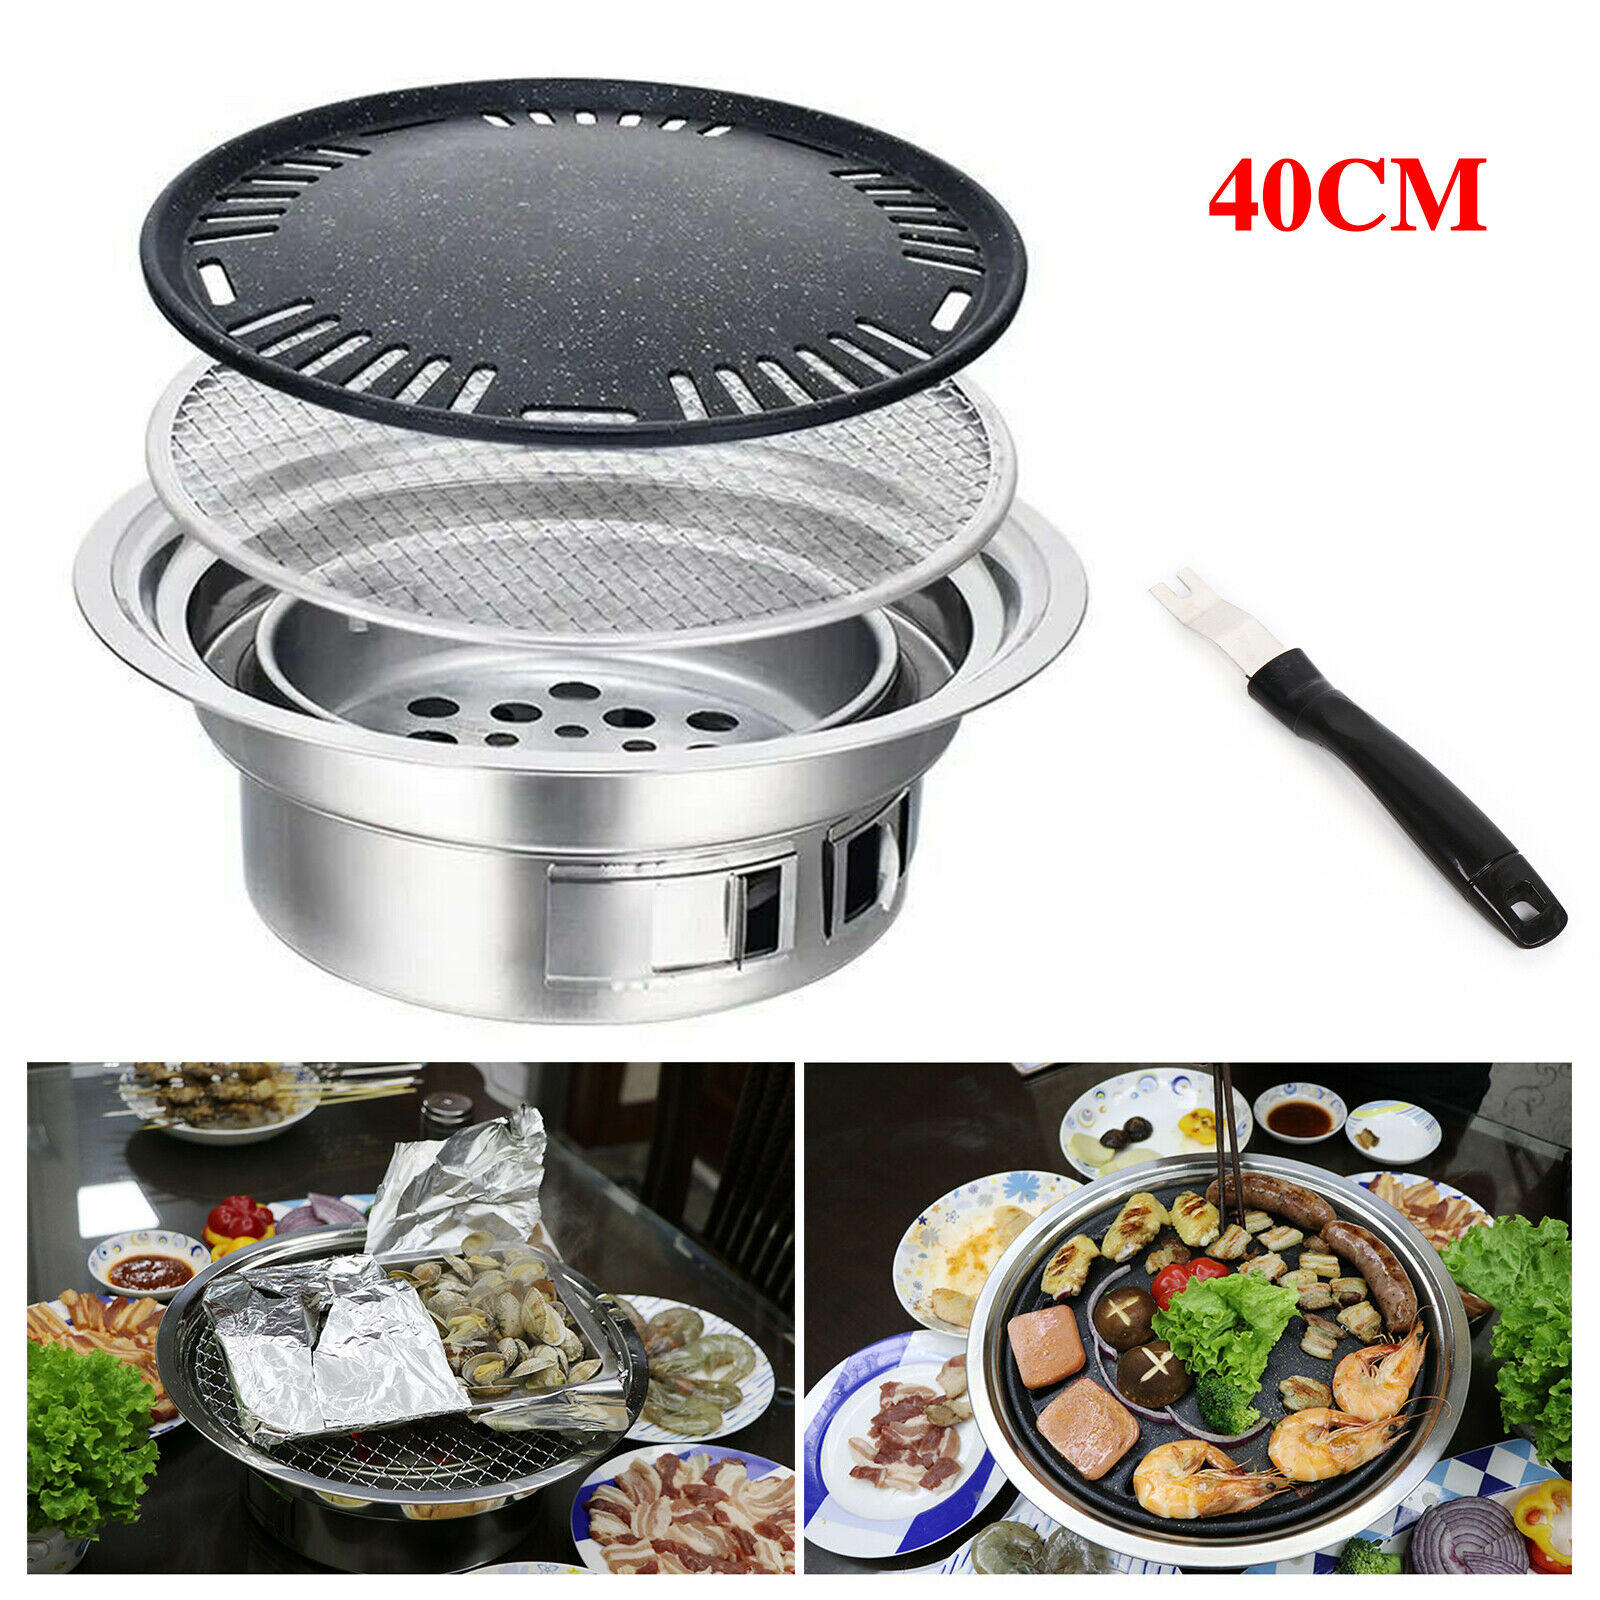 Portable Table Grill, Korean Style BBQ Grill Stainless Steel BBQ Grill Stove Outdoor Camping Cooker Charcoal Grill BBQ Round Barbecue Grill Indoor&Outdoor Grill BBQ - image 2 of 9